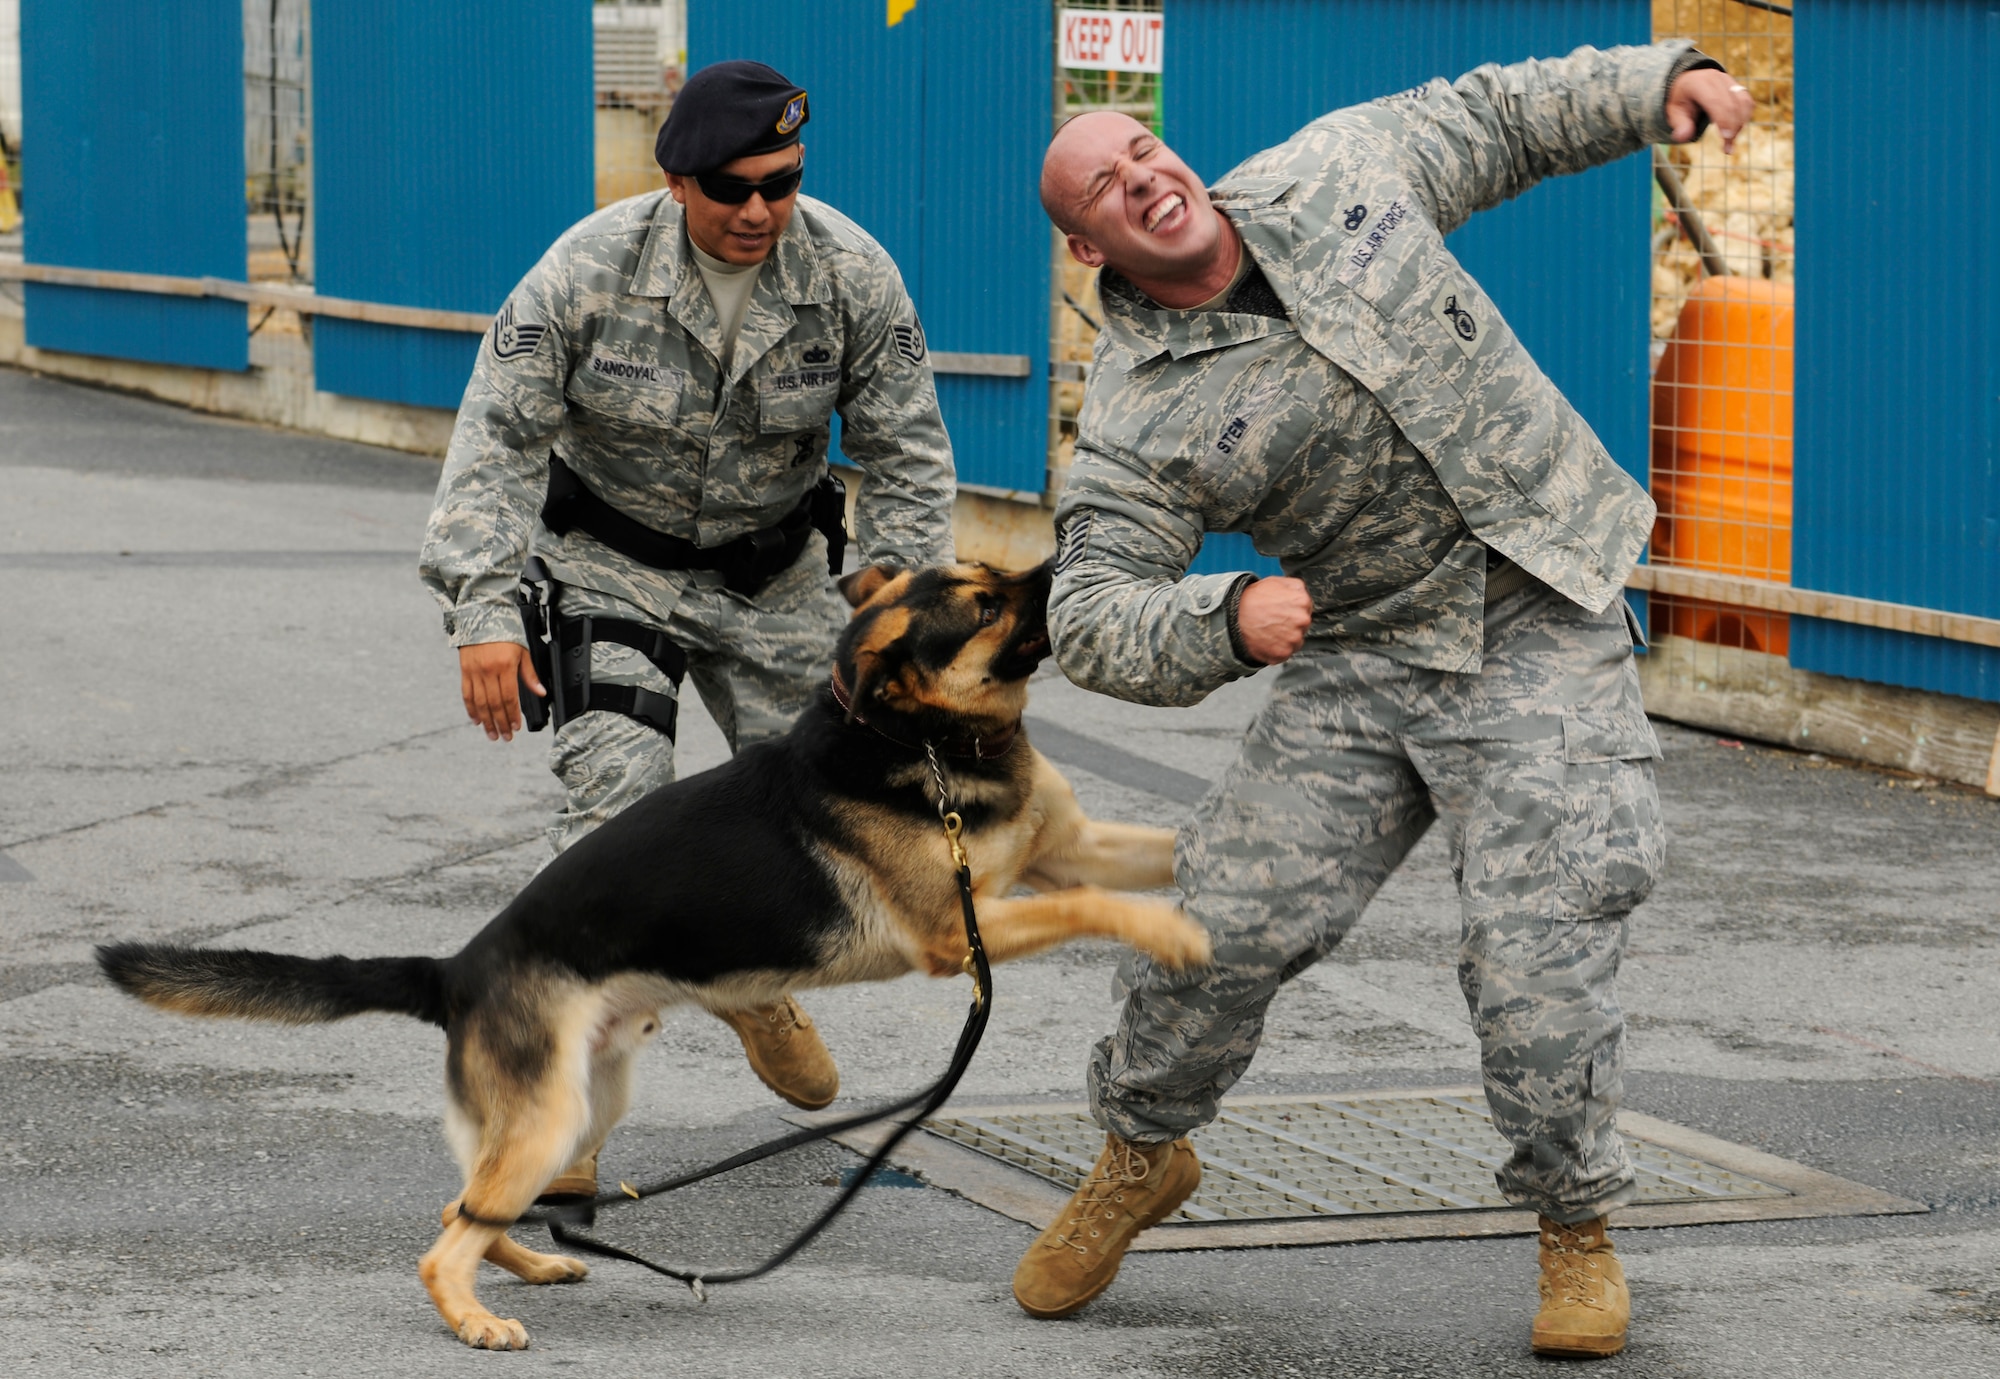 Zena, an 18th Security Forces military working dog, takes the suspected bank robber down during Beverly High 09-2 Local Operational Readiness Exercise May 12. The LORE tests base personnel on their readiness for real world emergency/combat events.  (U.S. Air Force photo/Airman 1st Class Chad Warren) 